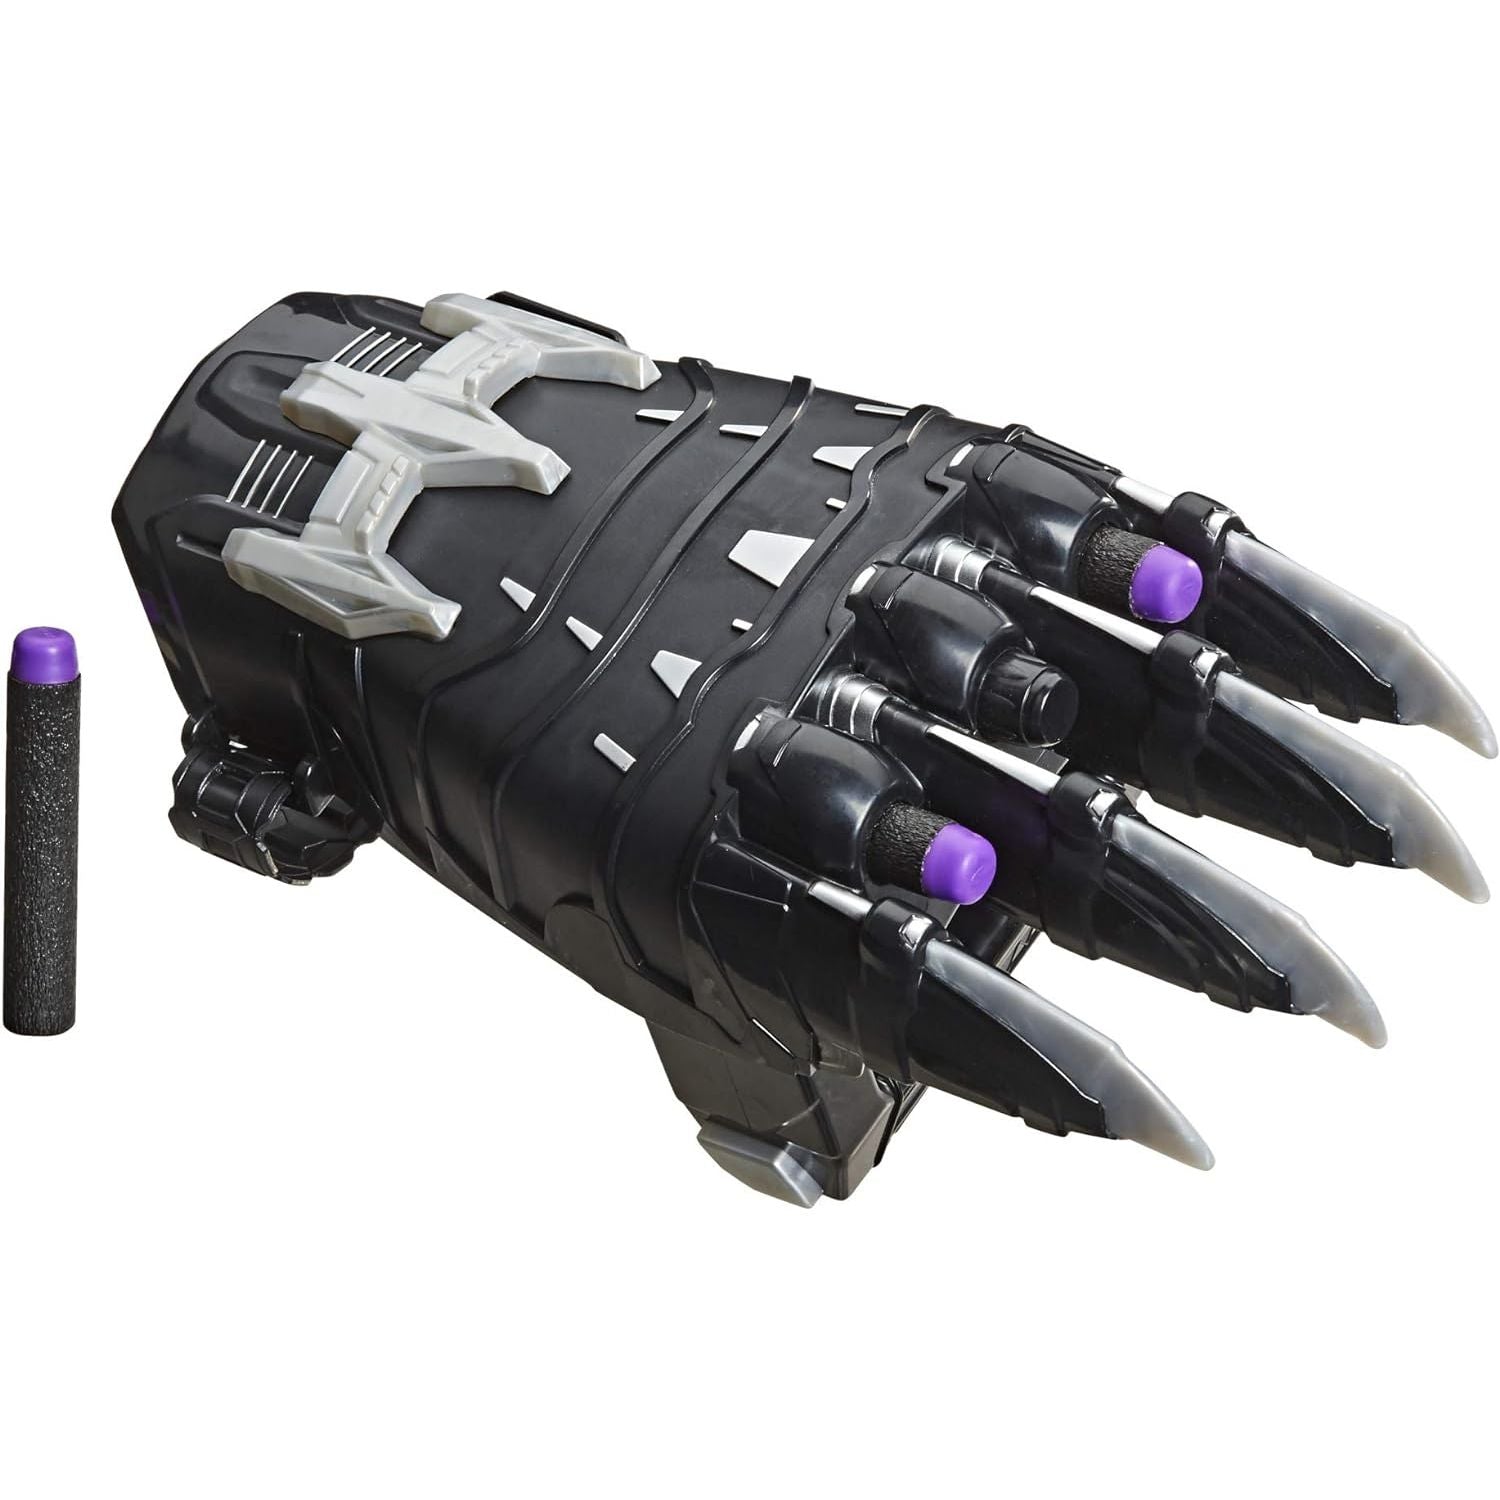 Hasbro NERF Power Moves Marvel Avengers Black Panther Power Slash Claw Dart-Launching Toy for Kids Roleplay